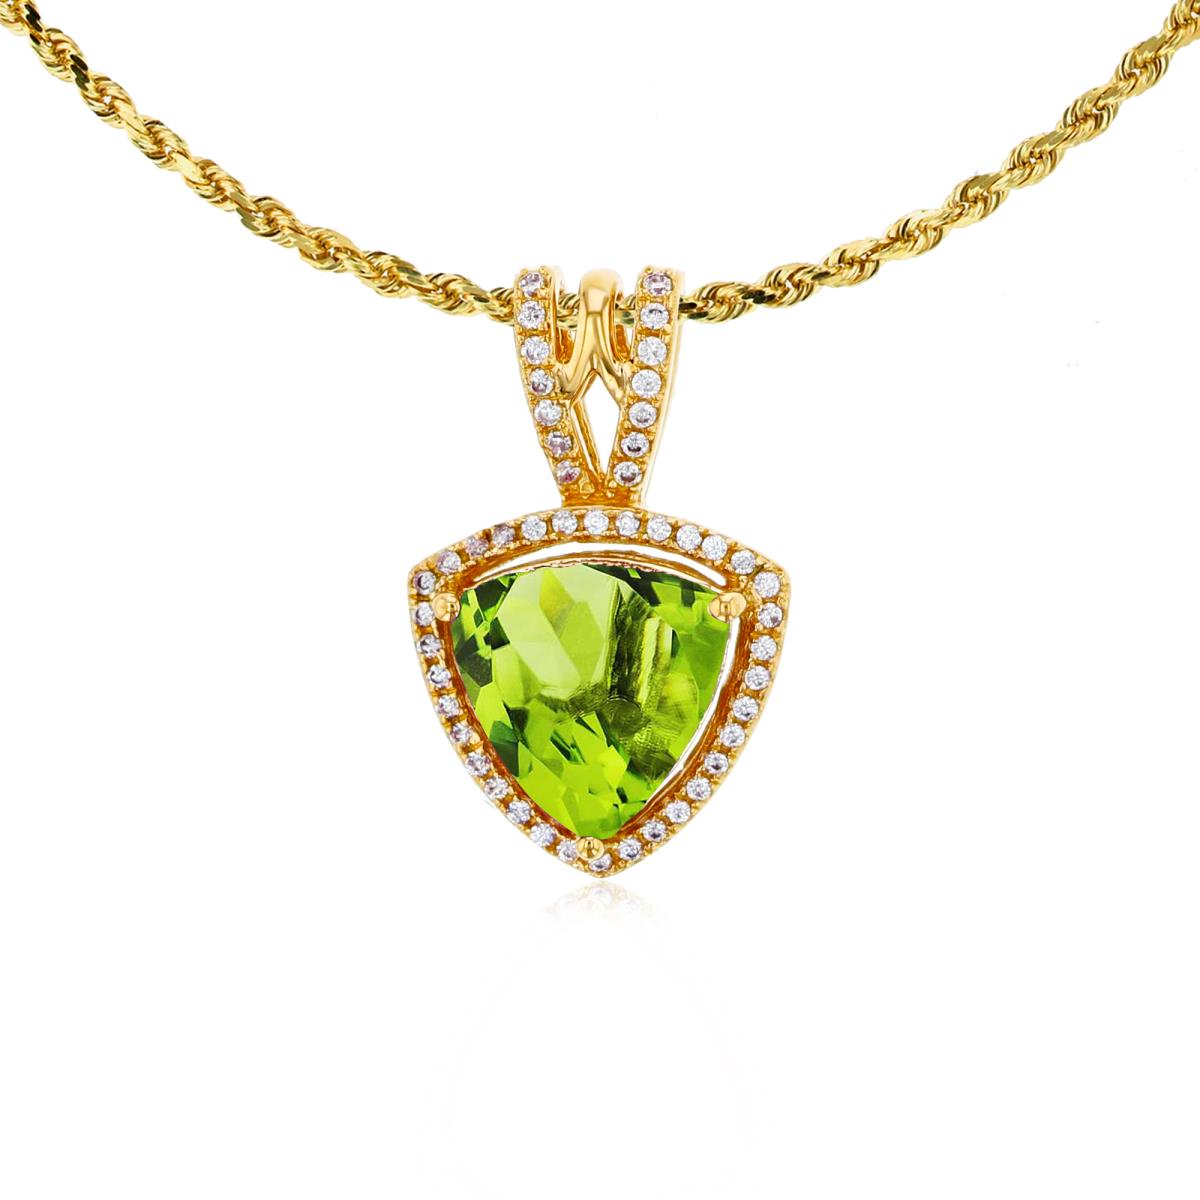 10K Yellow Gold 8mm Trillion Peridot & 0.13 CTTW Diamonds Frame 18" Rope Chain Necklace